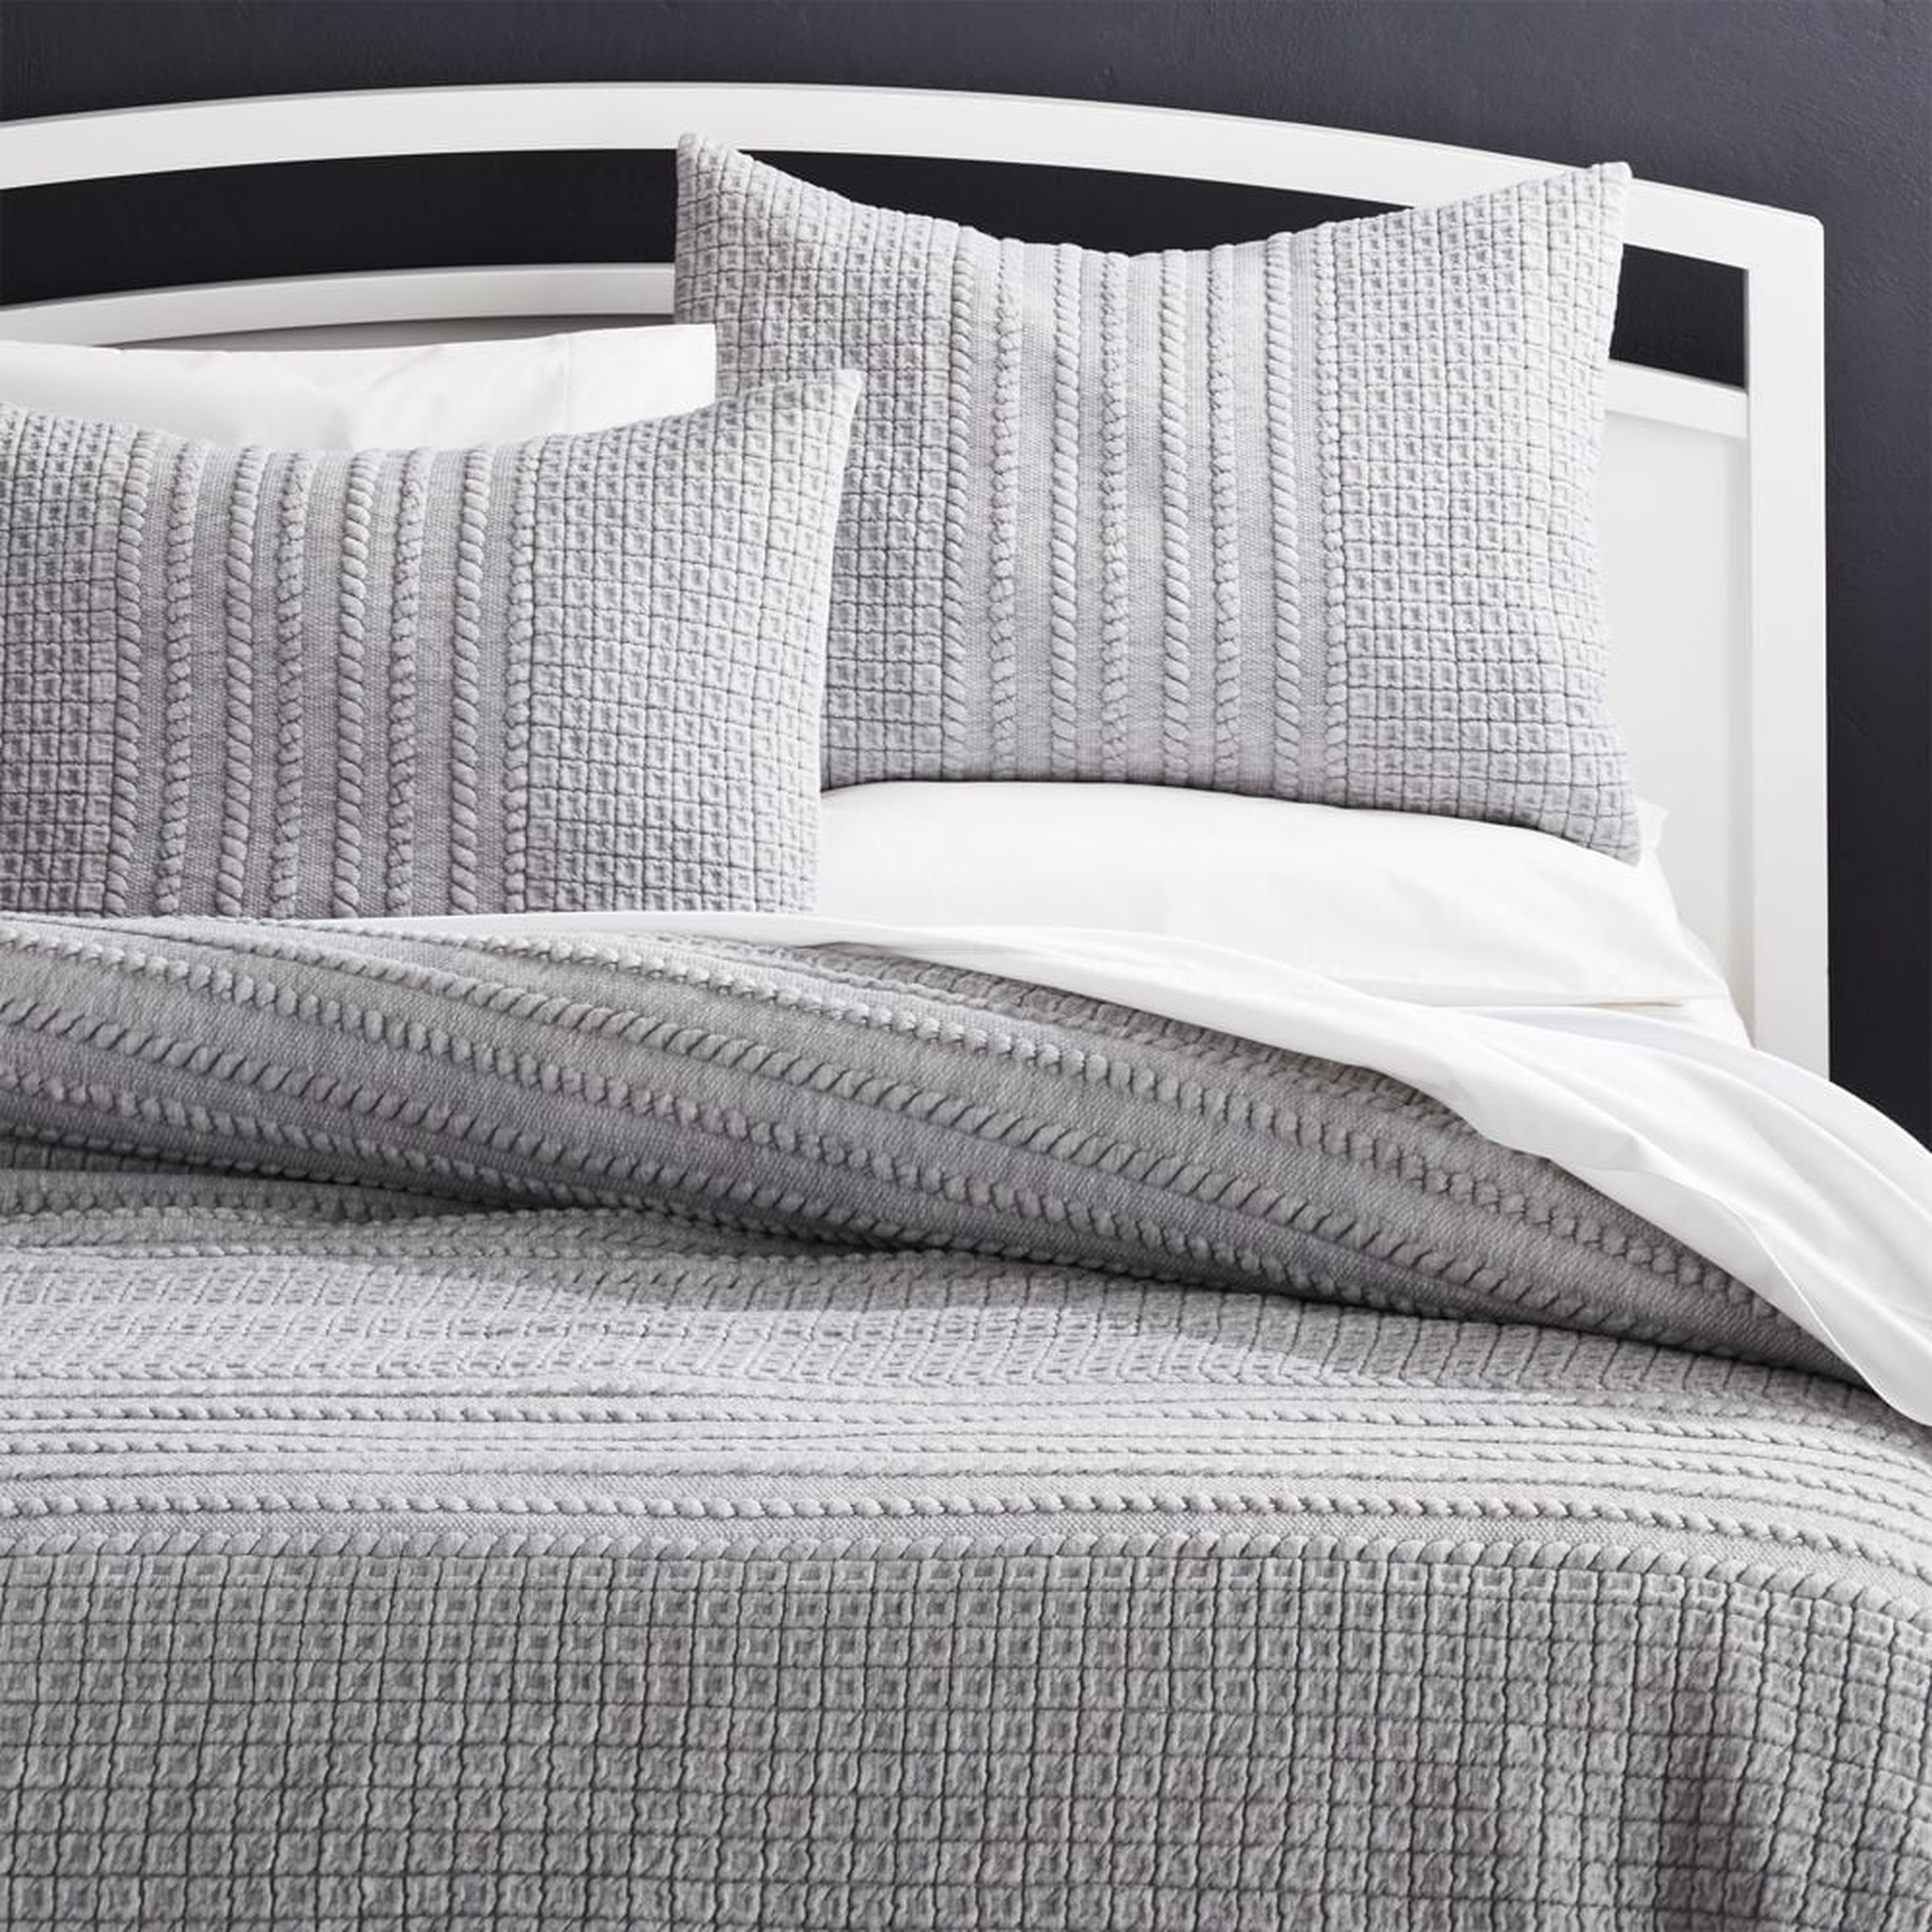 Doret Grey Jersey Quilt King - Crate and Barrel